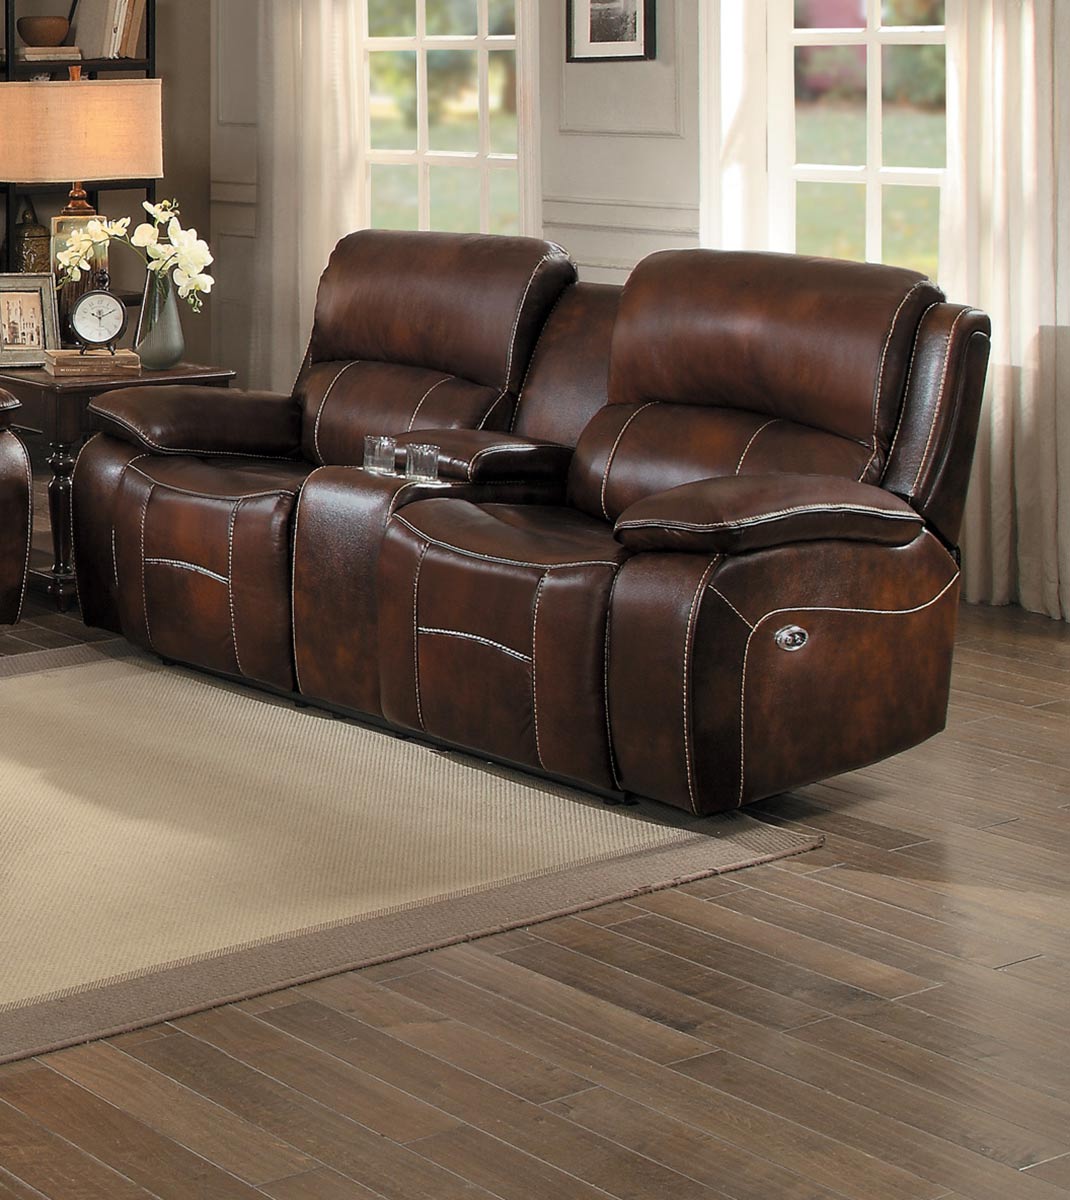 Homelegance Mahala Power Double Reclining Love Seat with Center Console - Brown Top Grain Leather Match